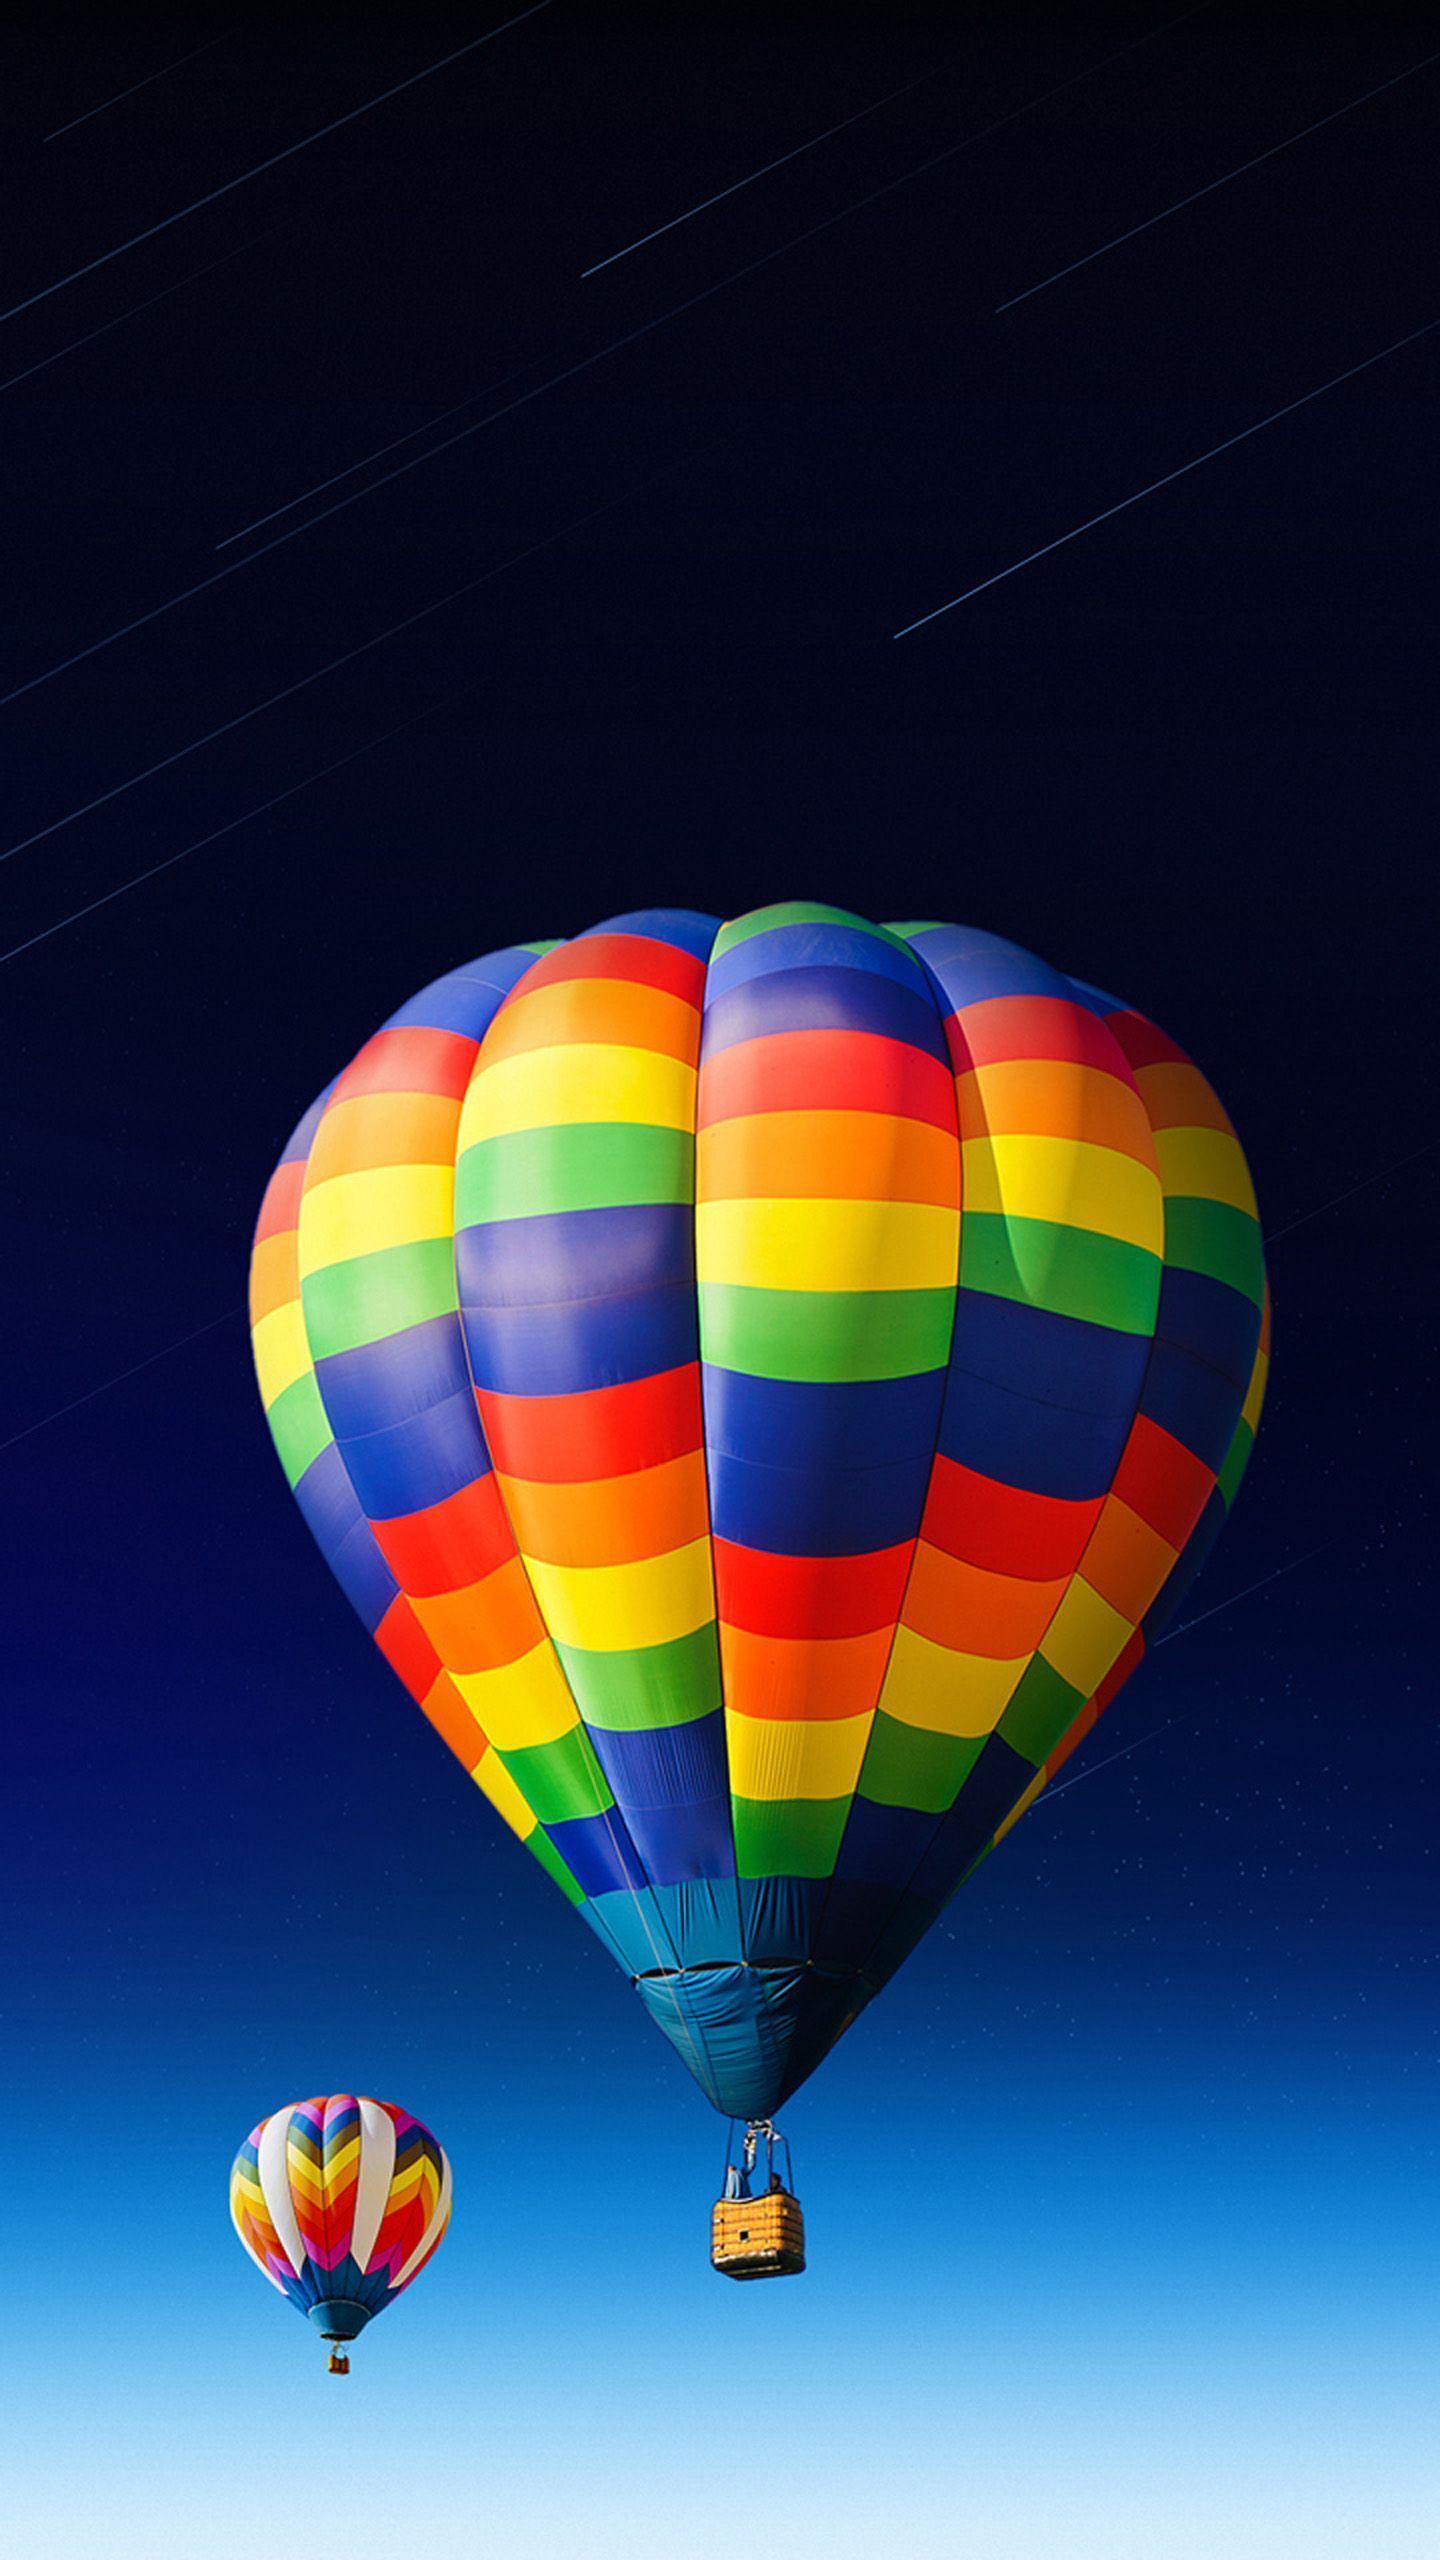 Colorful balloons wallpaper for galaxy S6